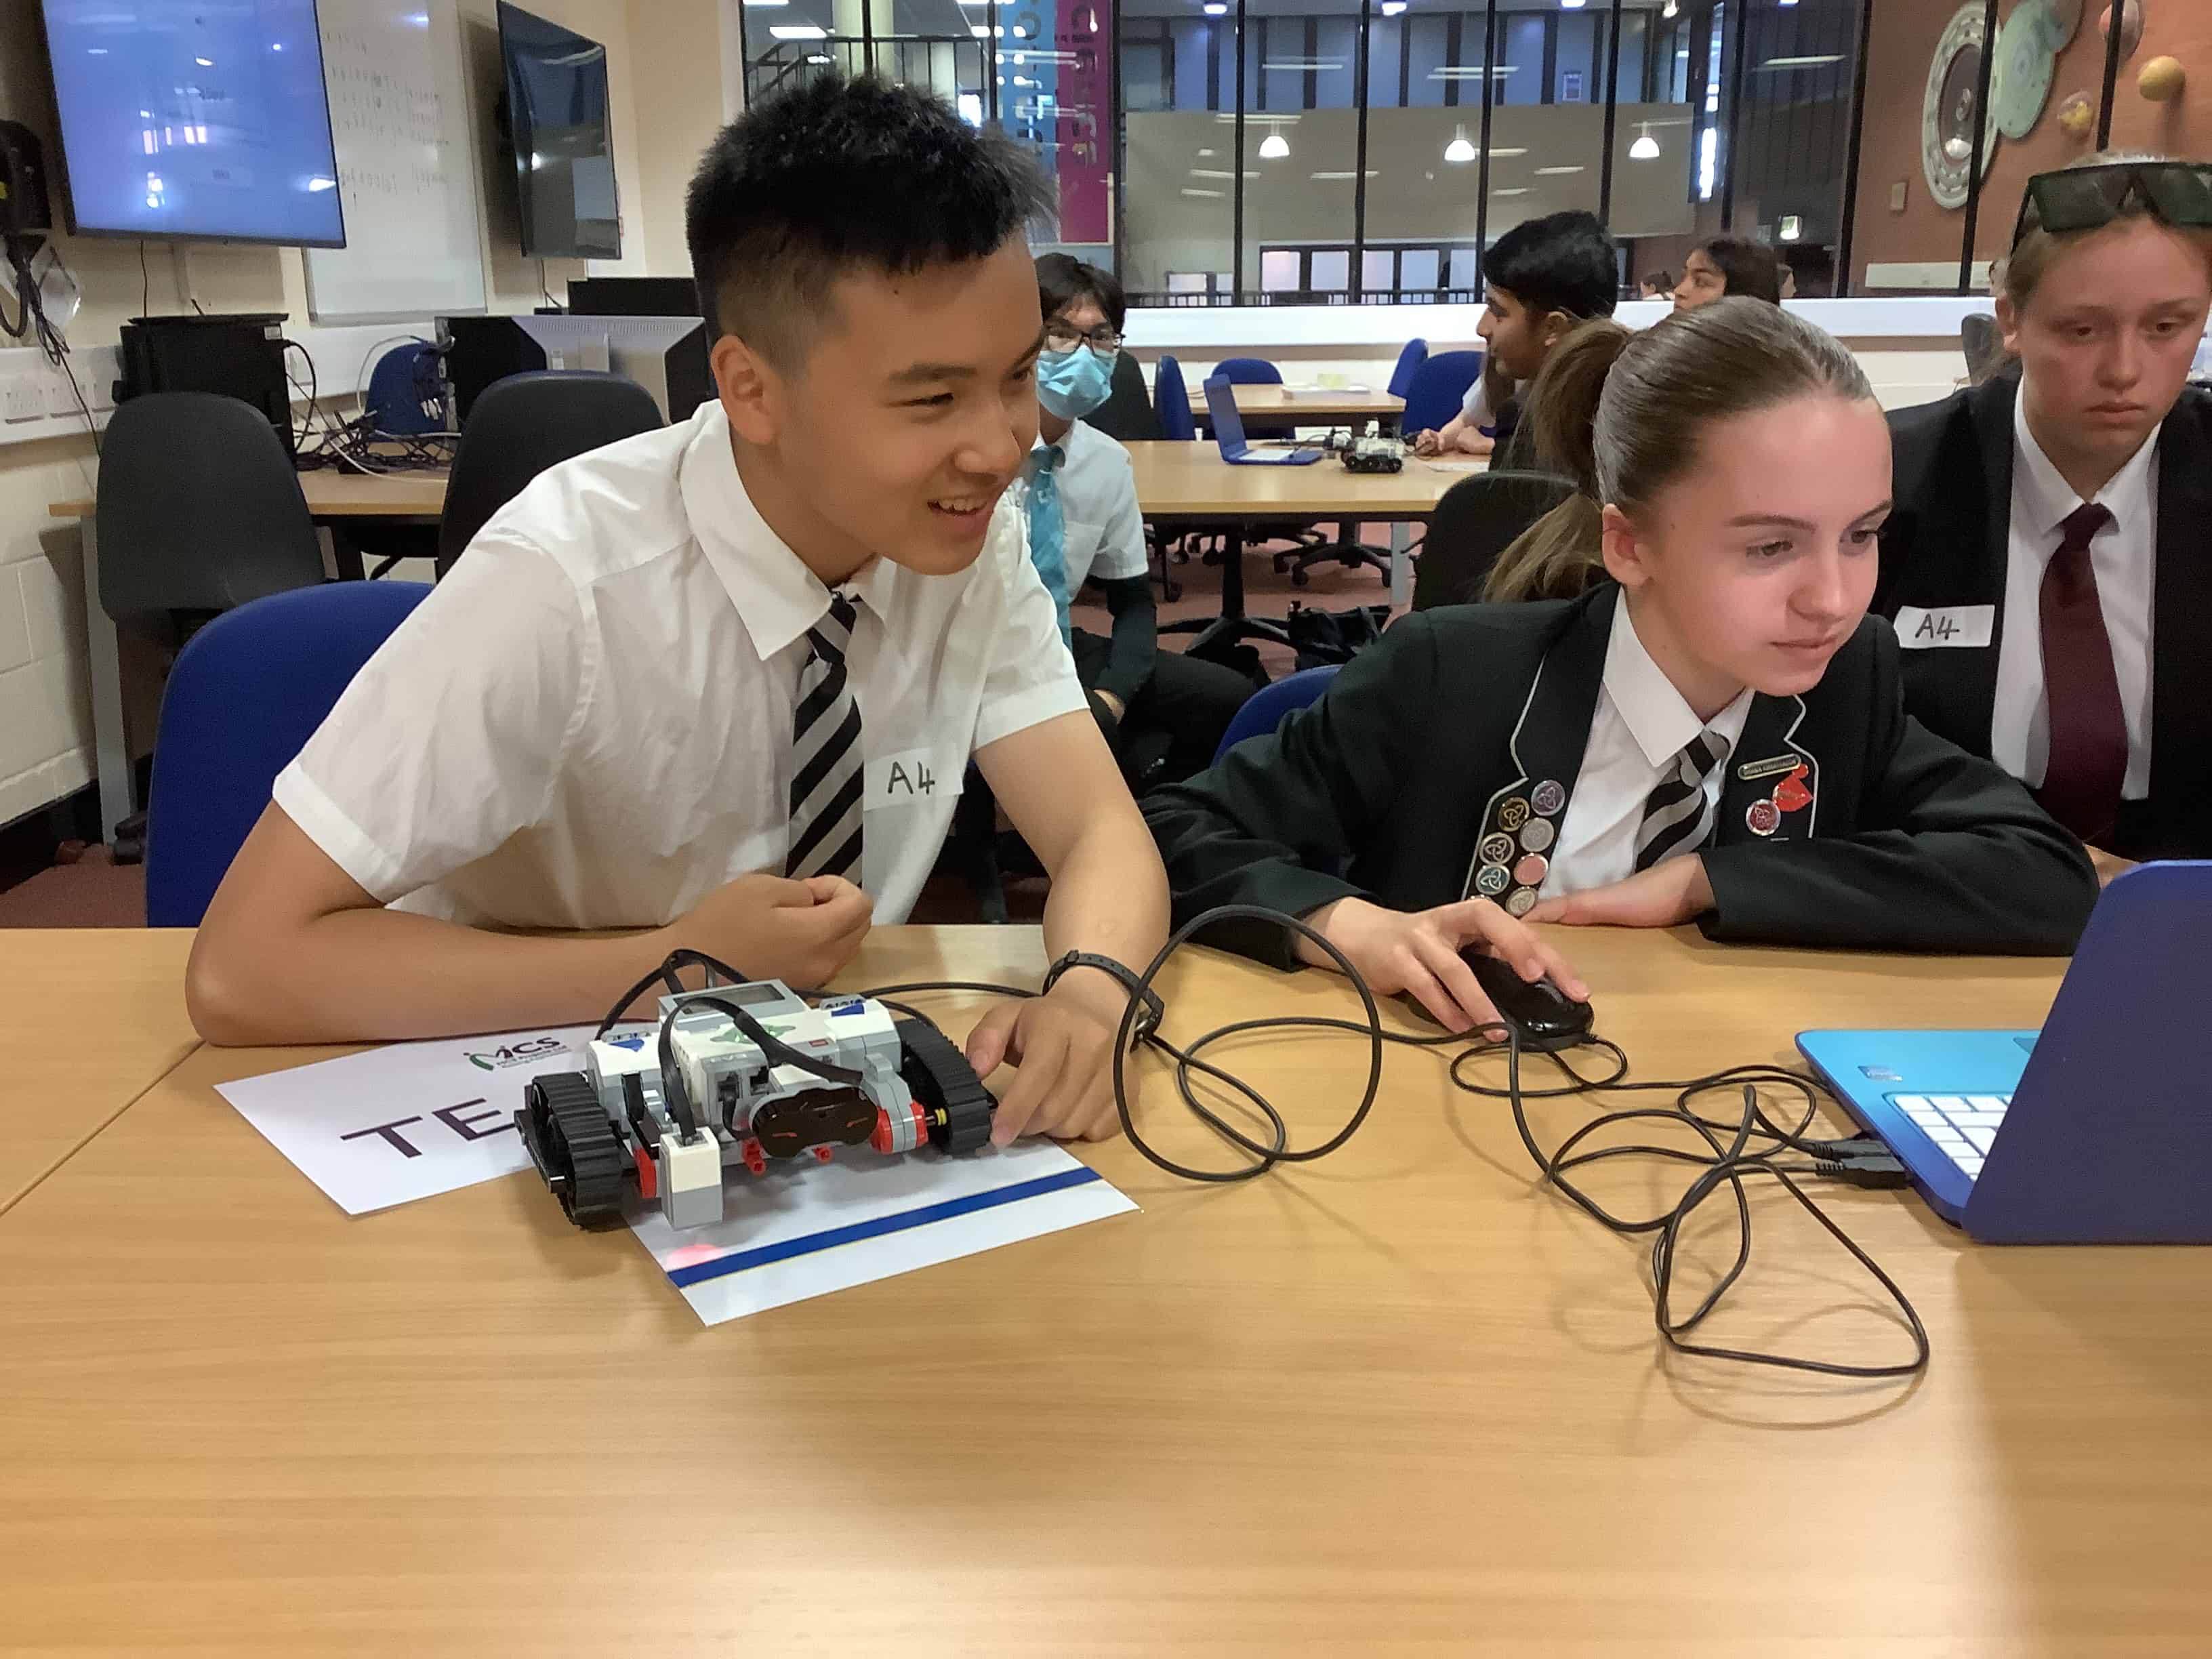 Laurus Ryecroft students programme a robot as part of the MCS Science and Technology challenge during Super Science Week.